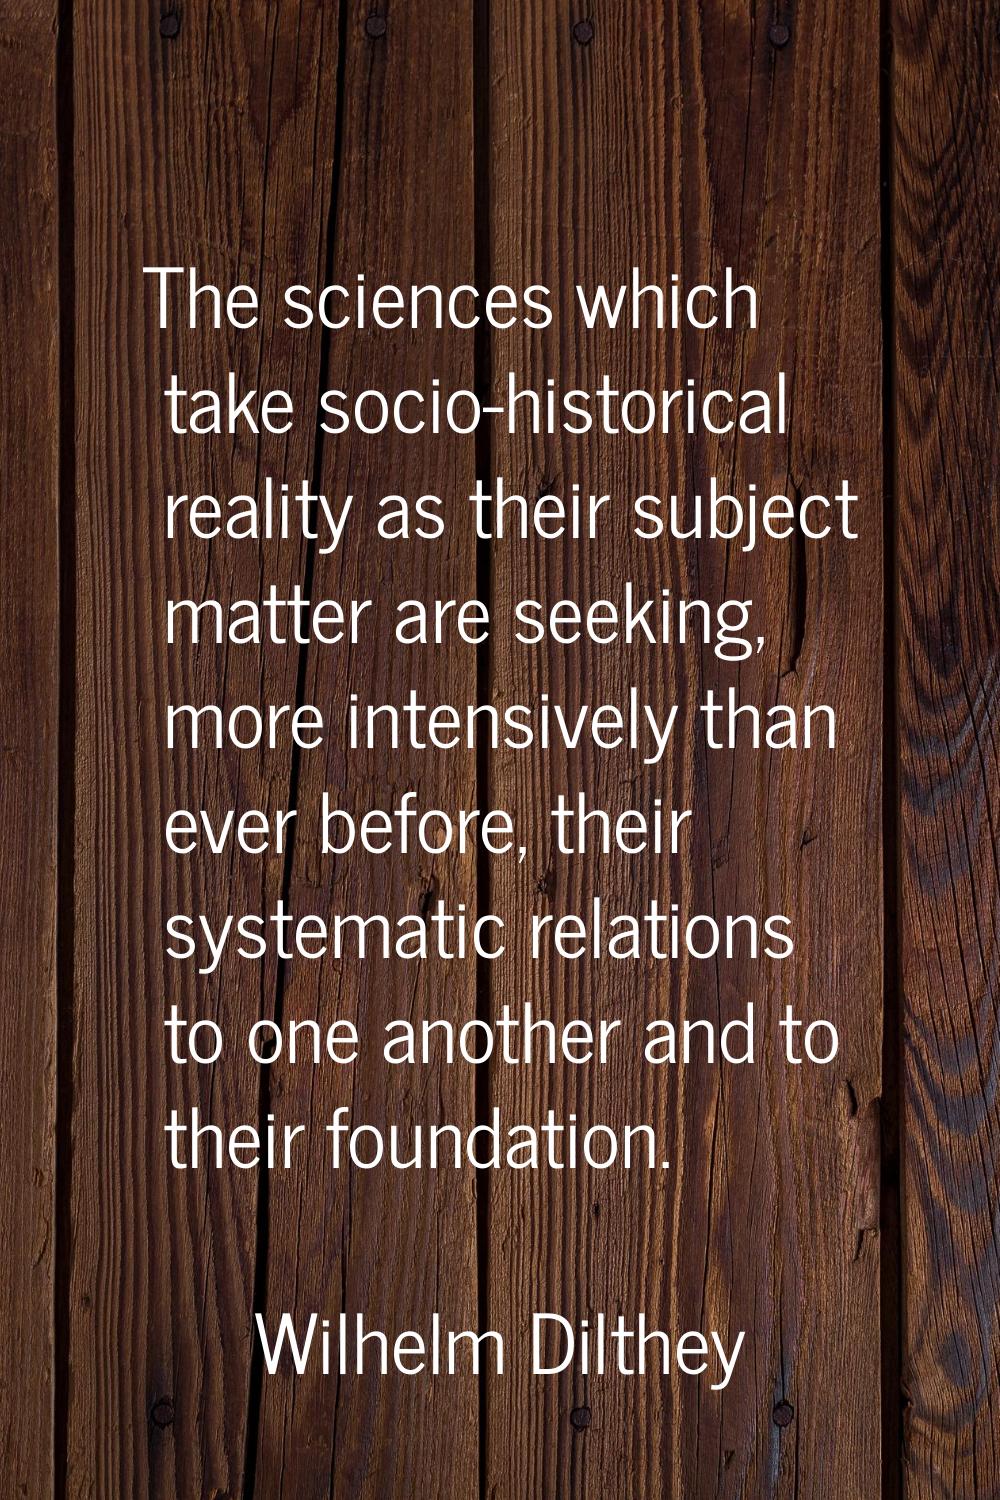 The sciences which take socio-historical reality as their subject matter are seeking, more intensiv